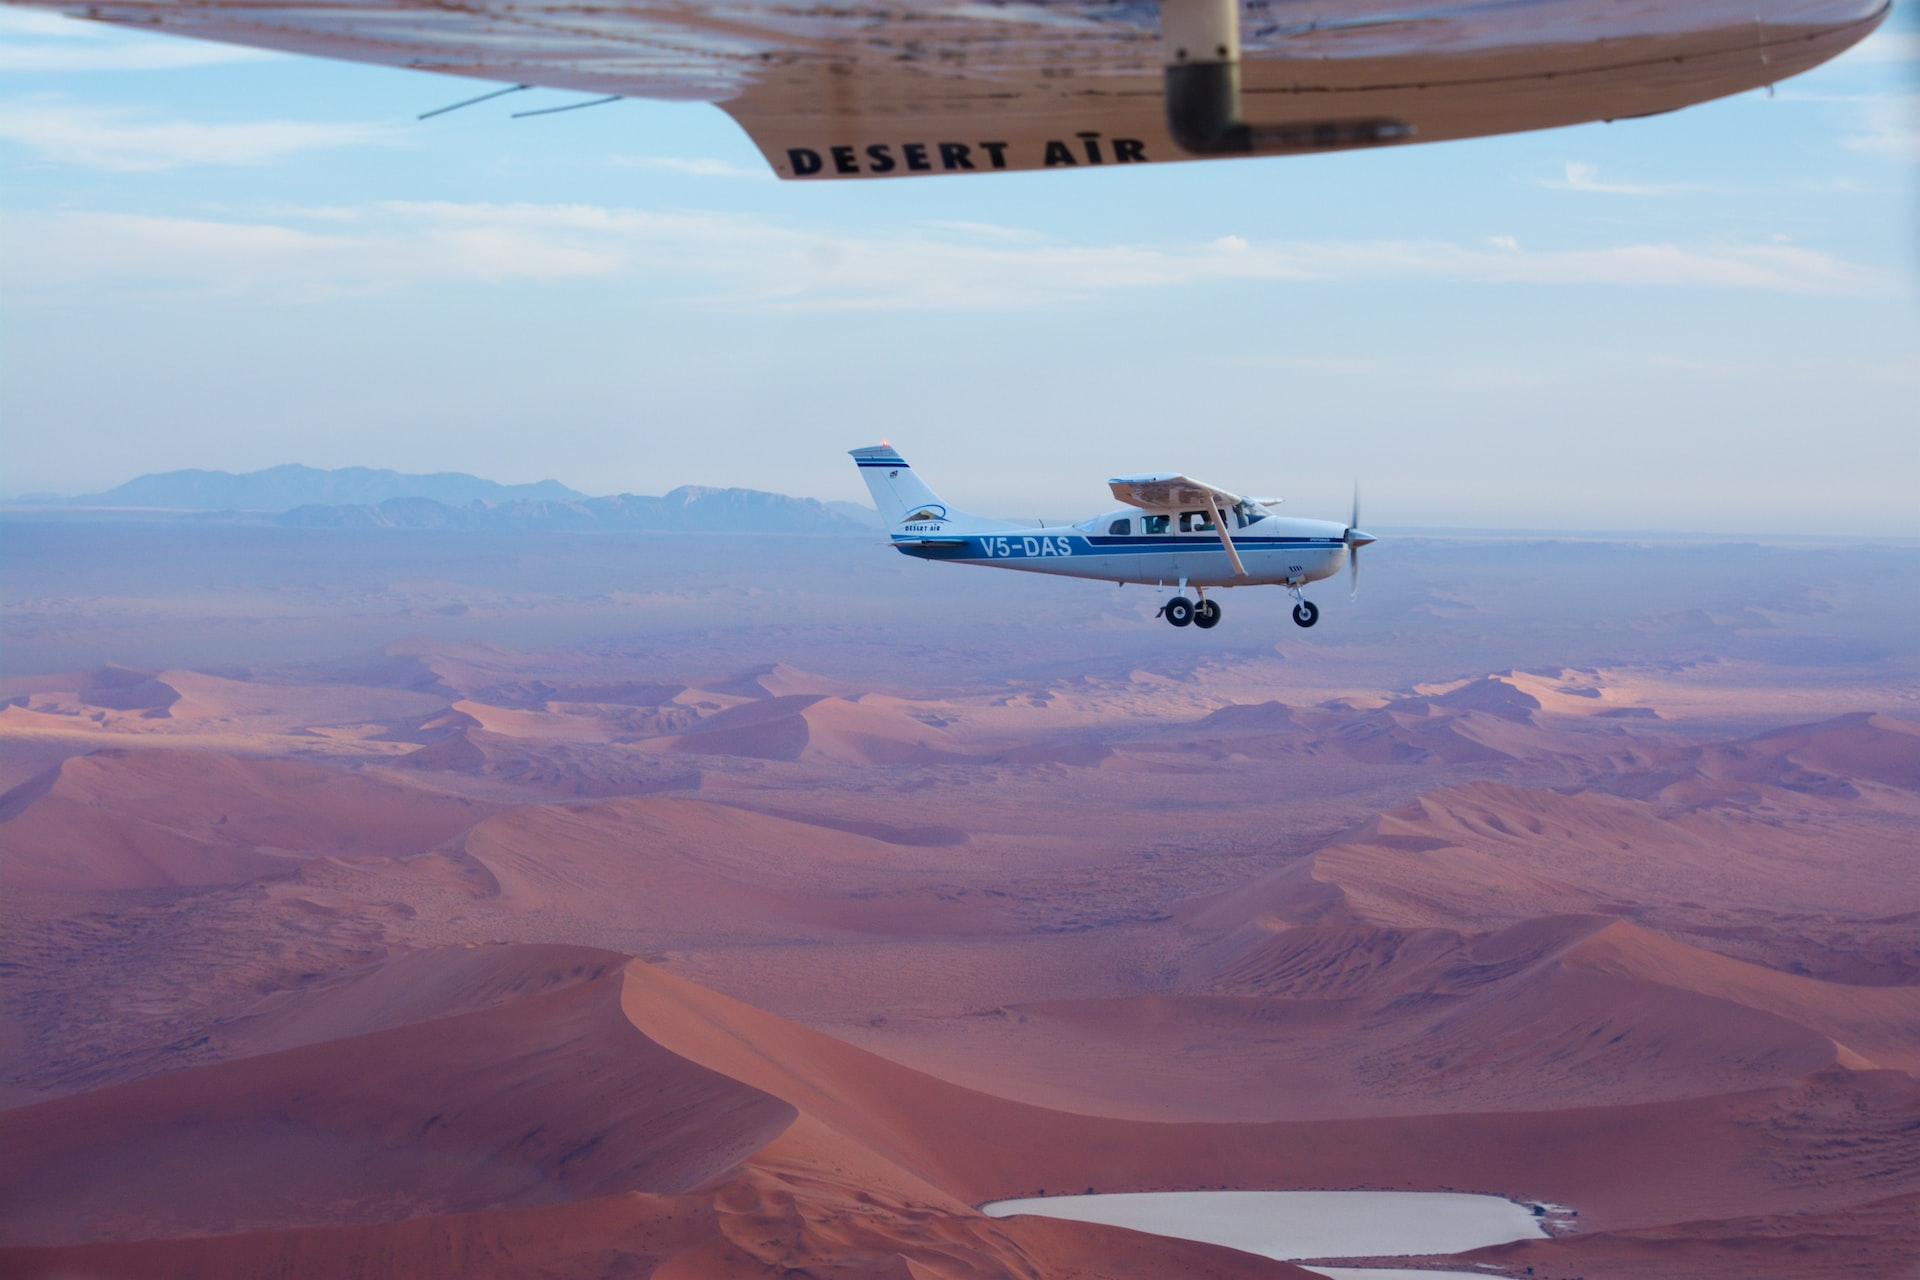 Two small airplanes flying over a desert with an oasis.